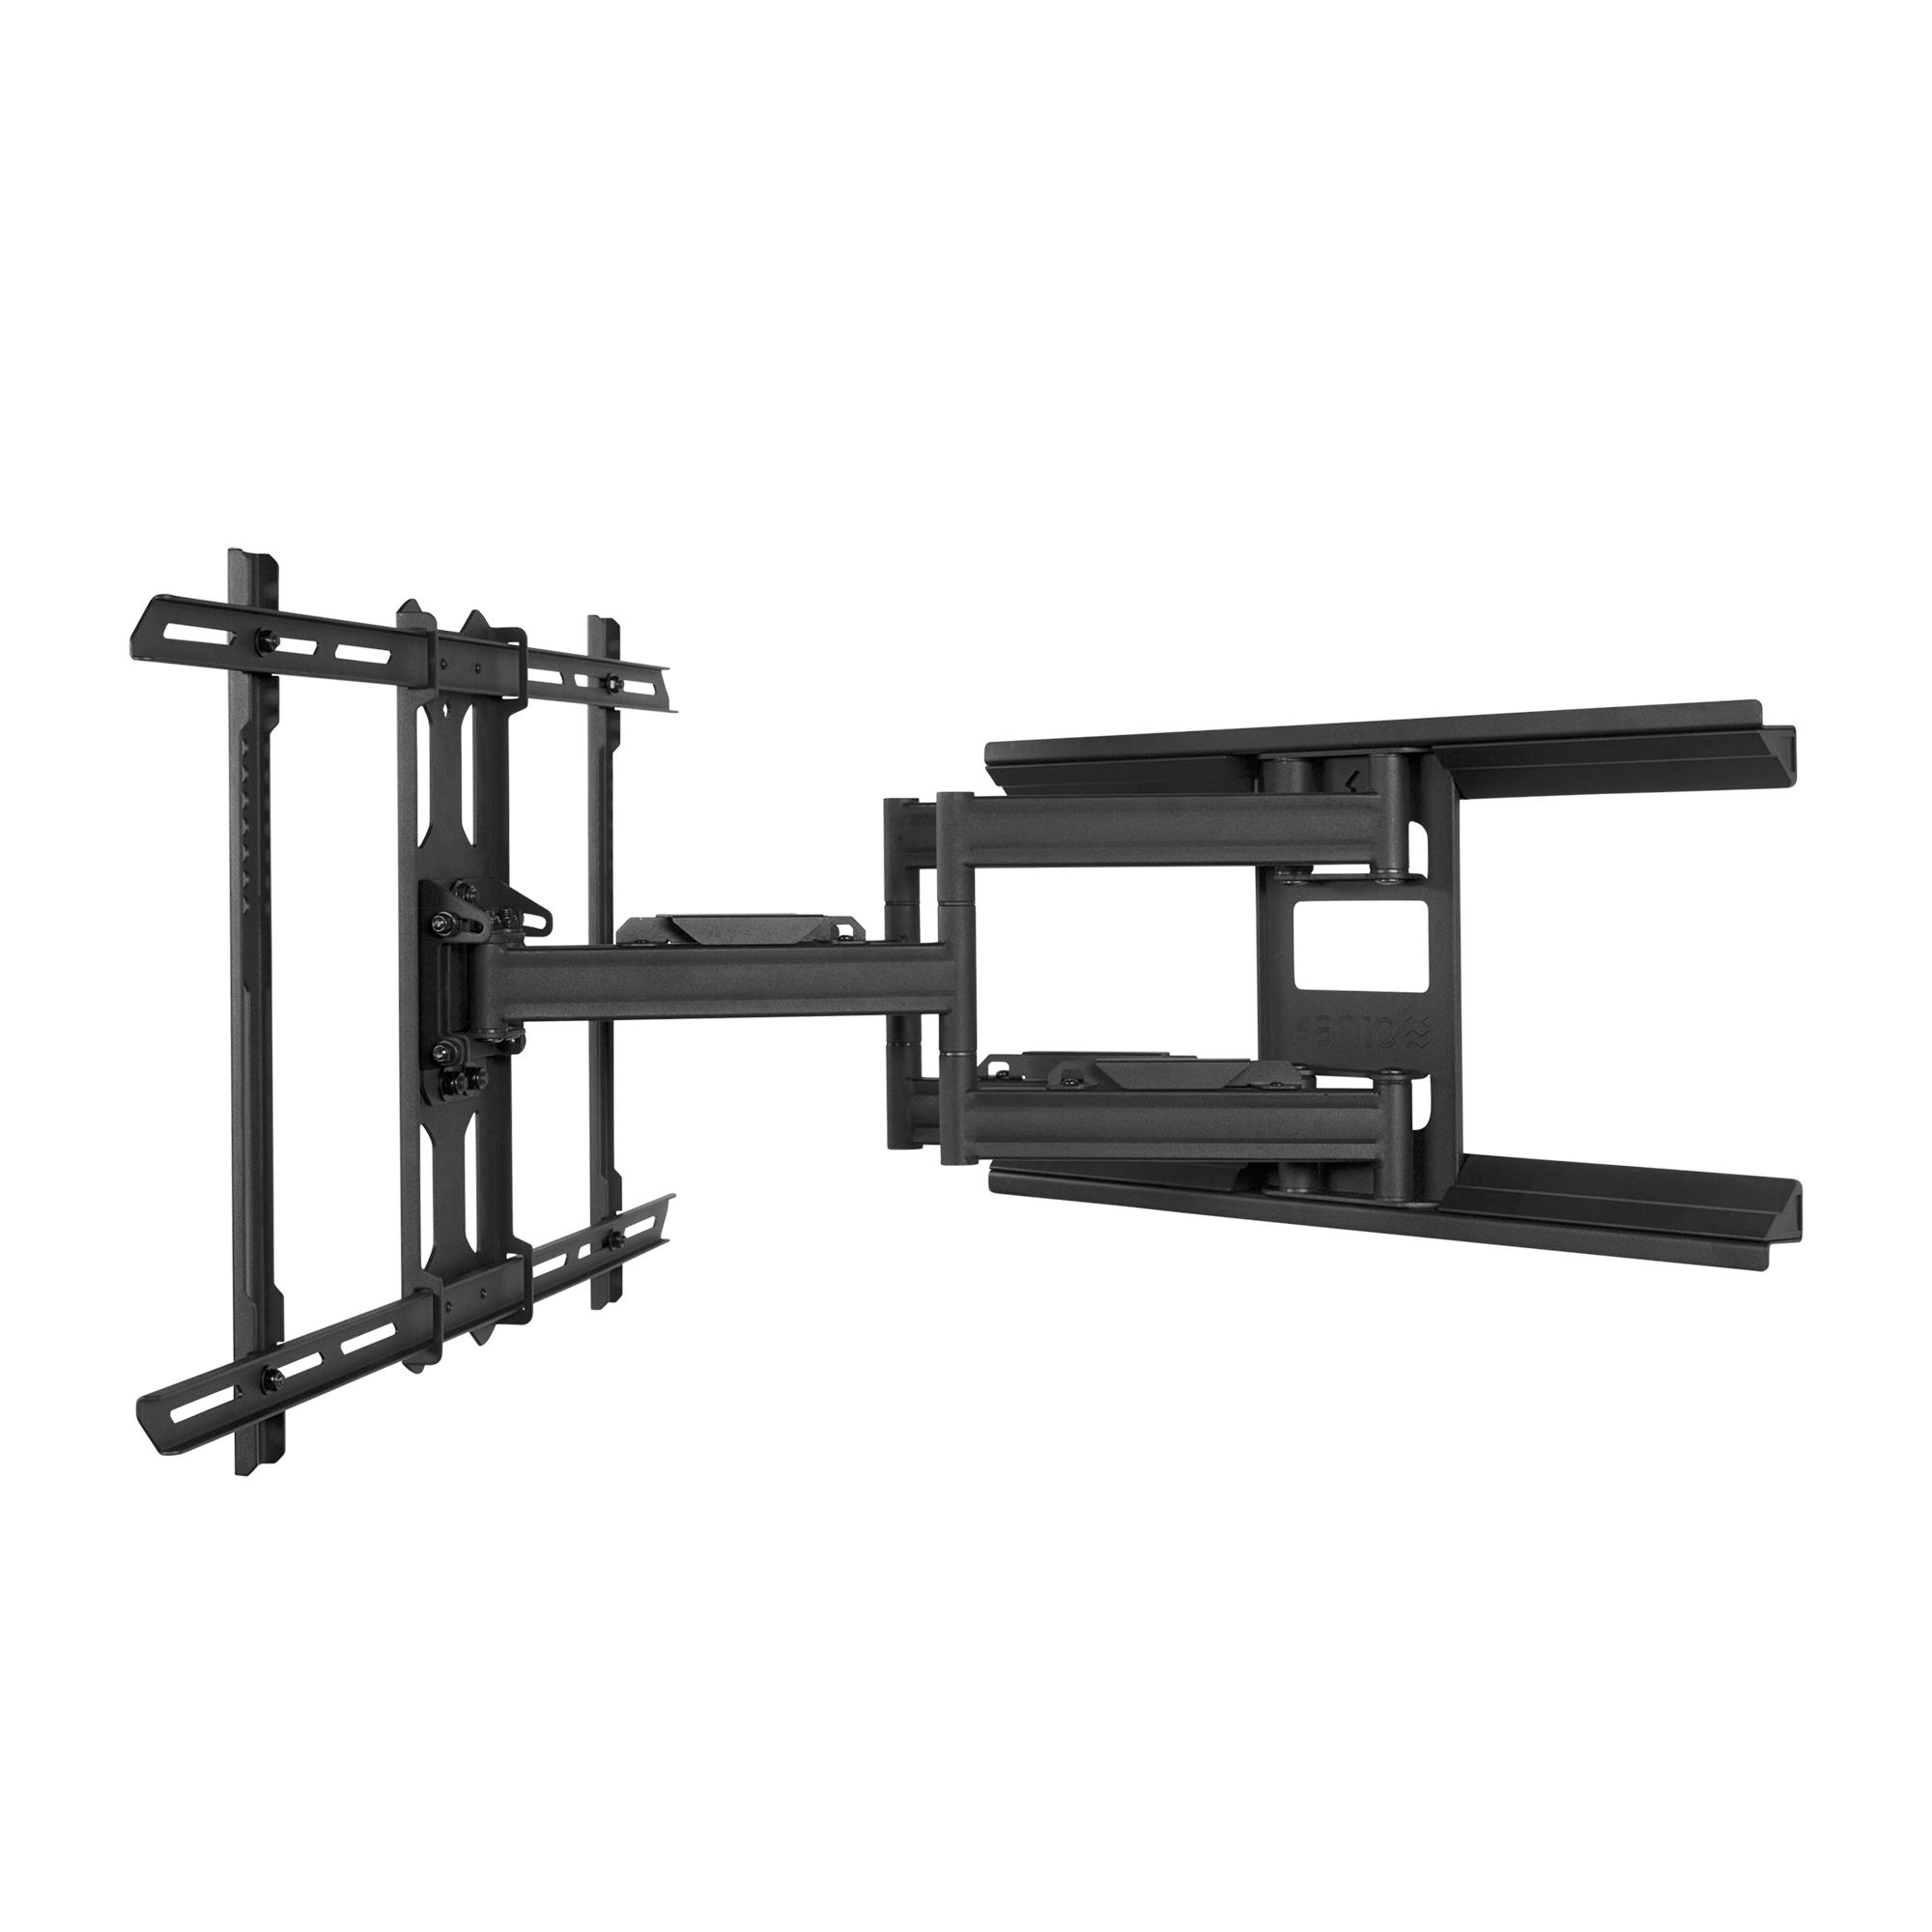 Kanto PDX650 Full Motion Wall Mount for 37-75 inch Displays BLACK - Click Image to Close